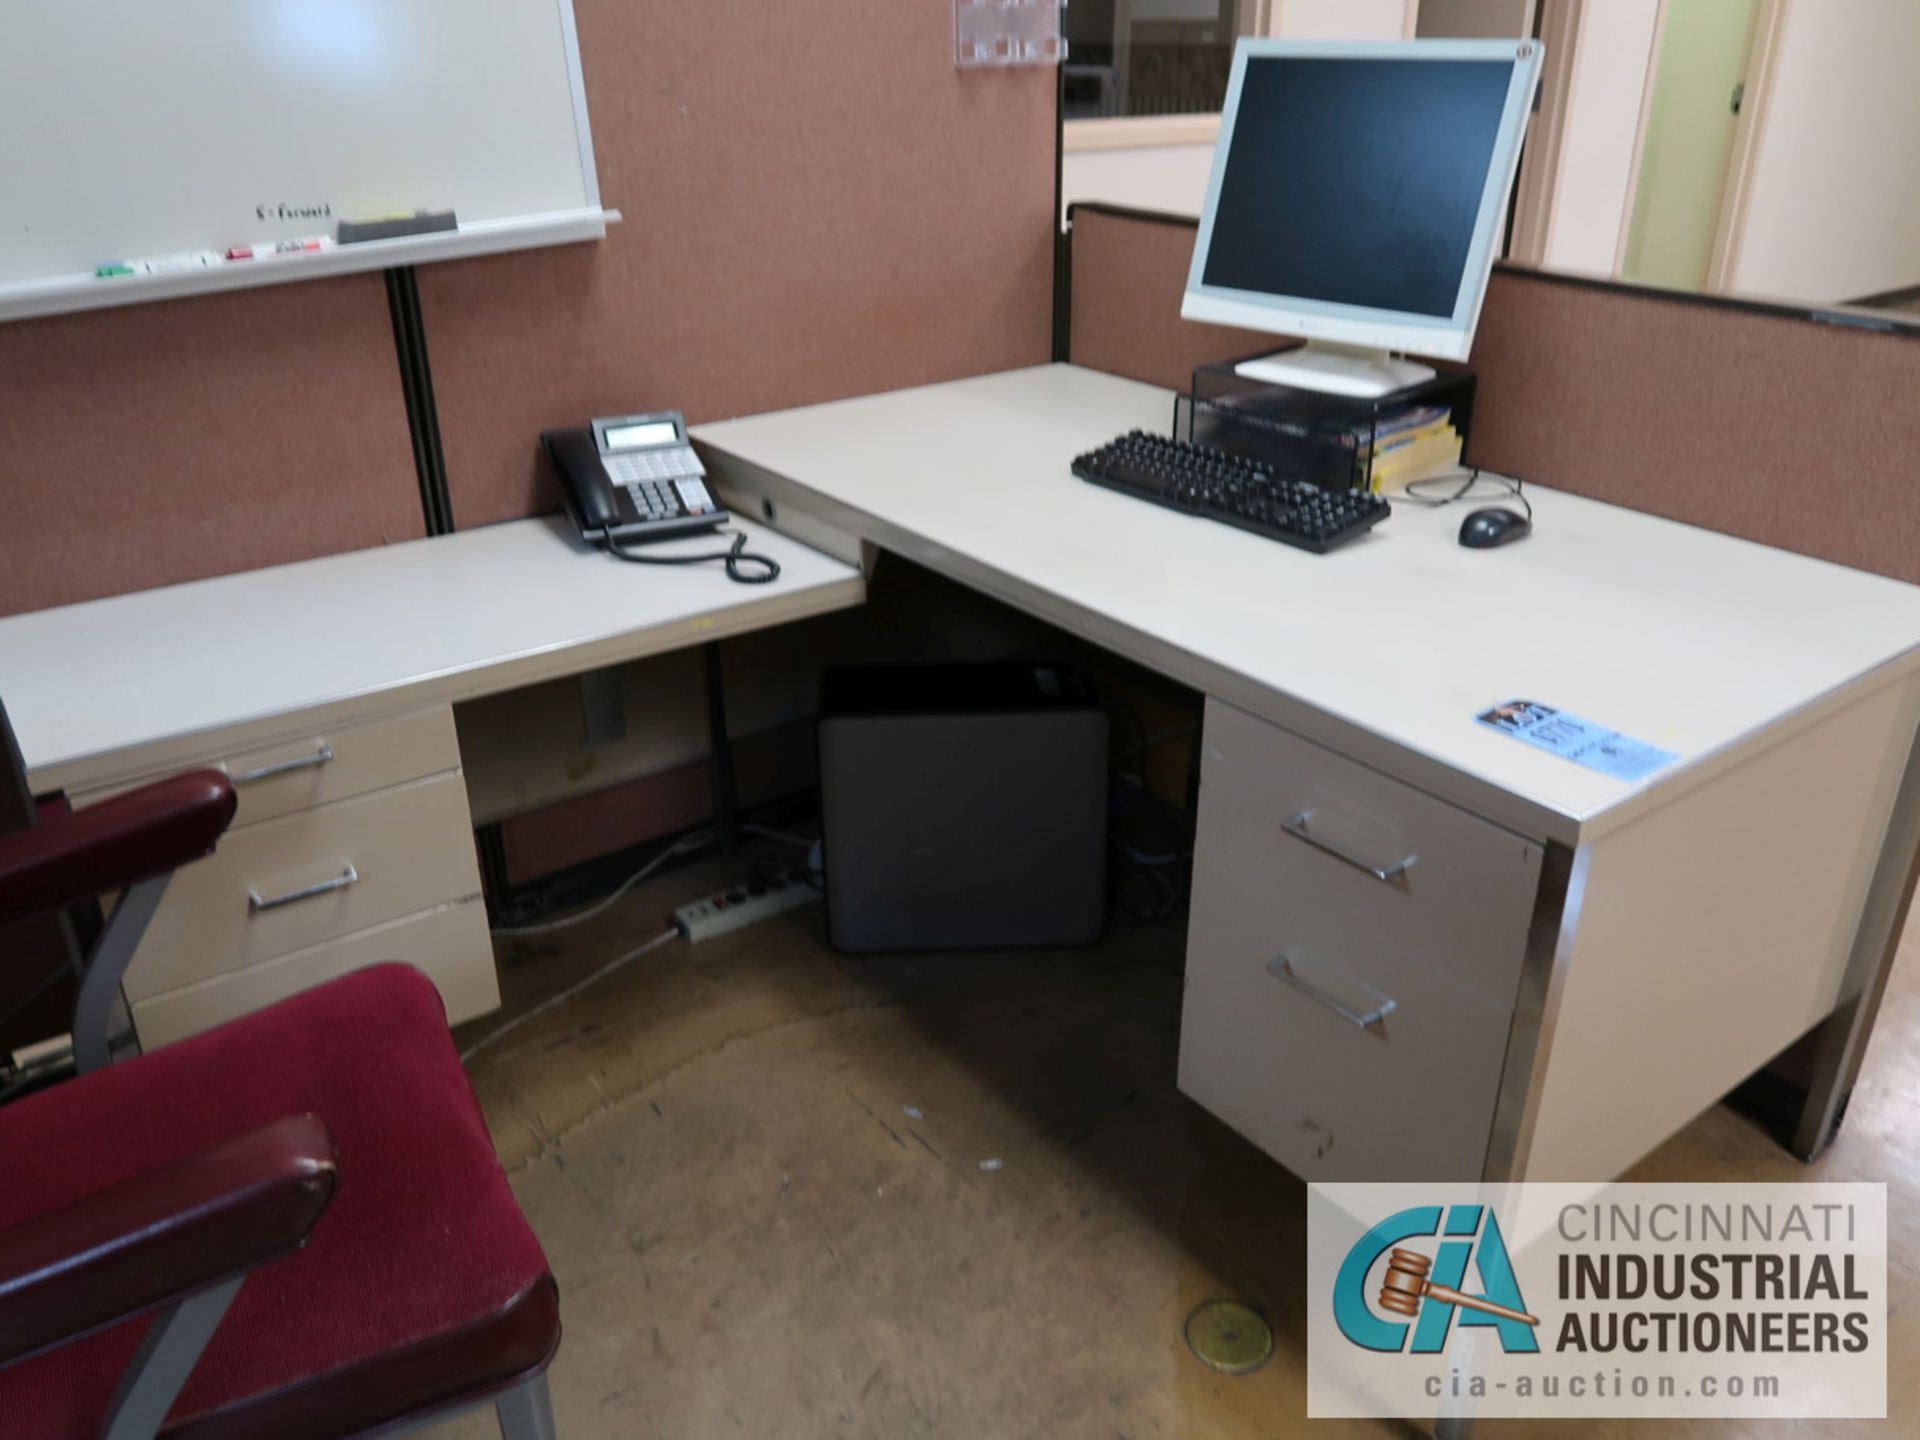 (LOT) FURNITURE IN CUBICAL INCLUDING (3) DESKS AND (2) CABINETS - Image 3 of 4